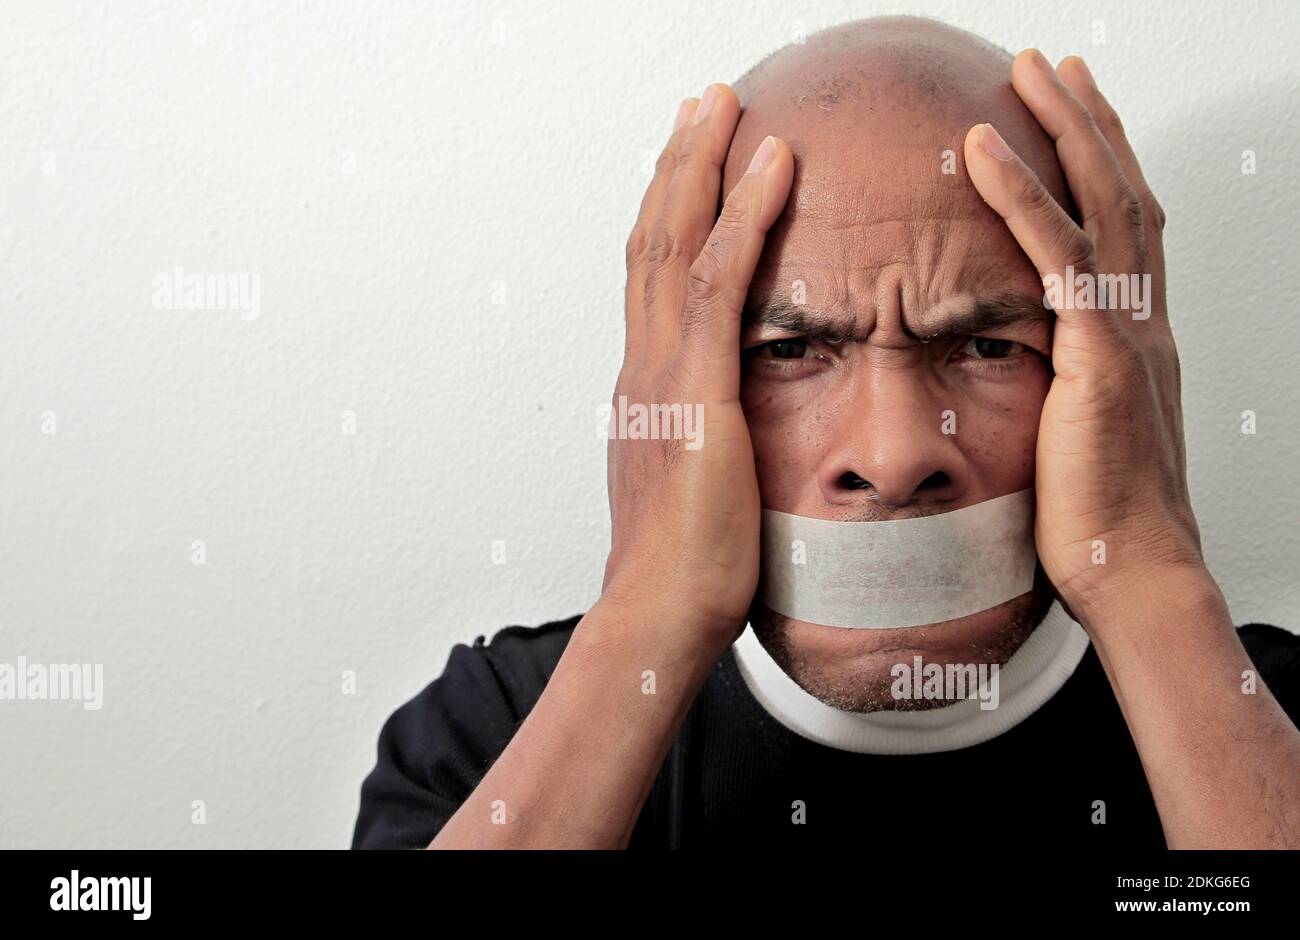 men feeling the pain after being discriminated with tape over his mouth on white background stock photo Stock Photo